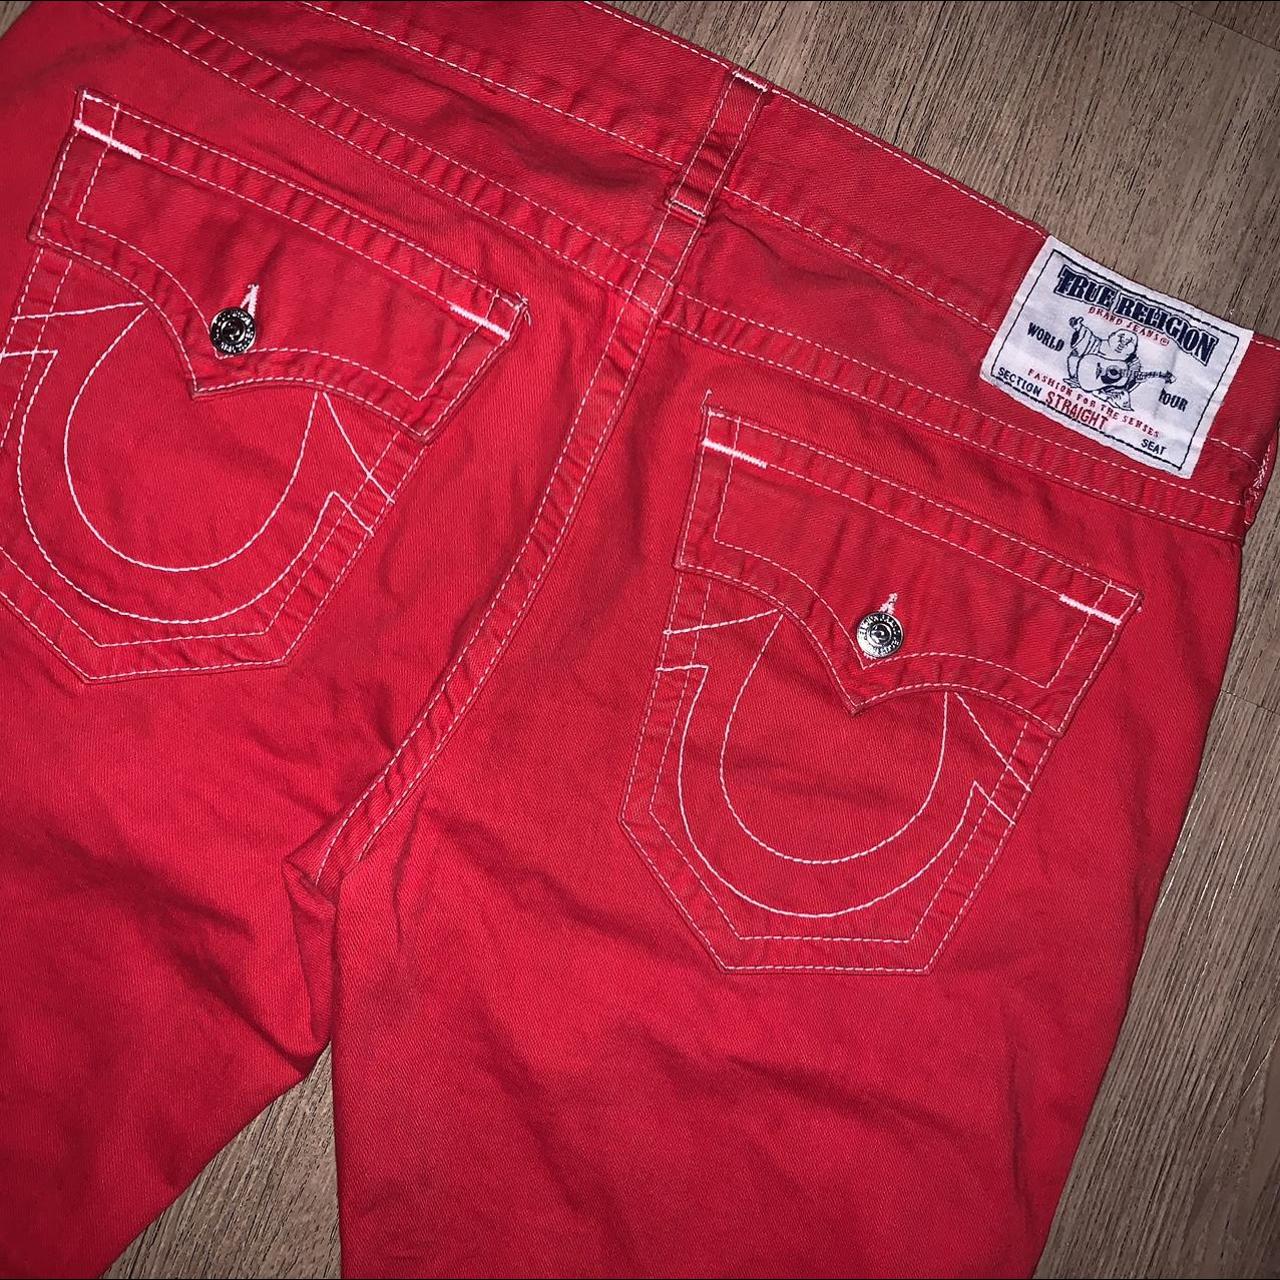 Red True Religion Jeans Good Condition Sad to let... - Depop